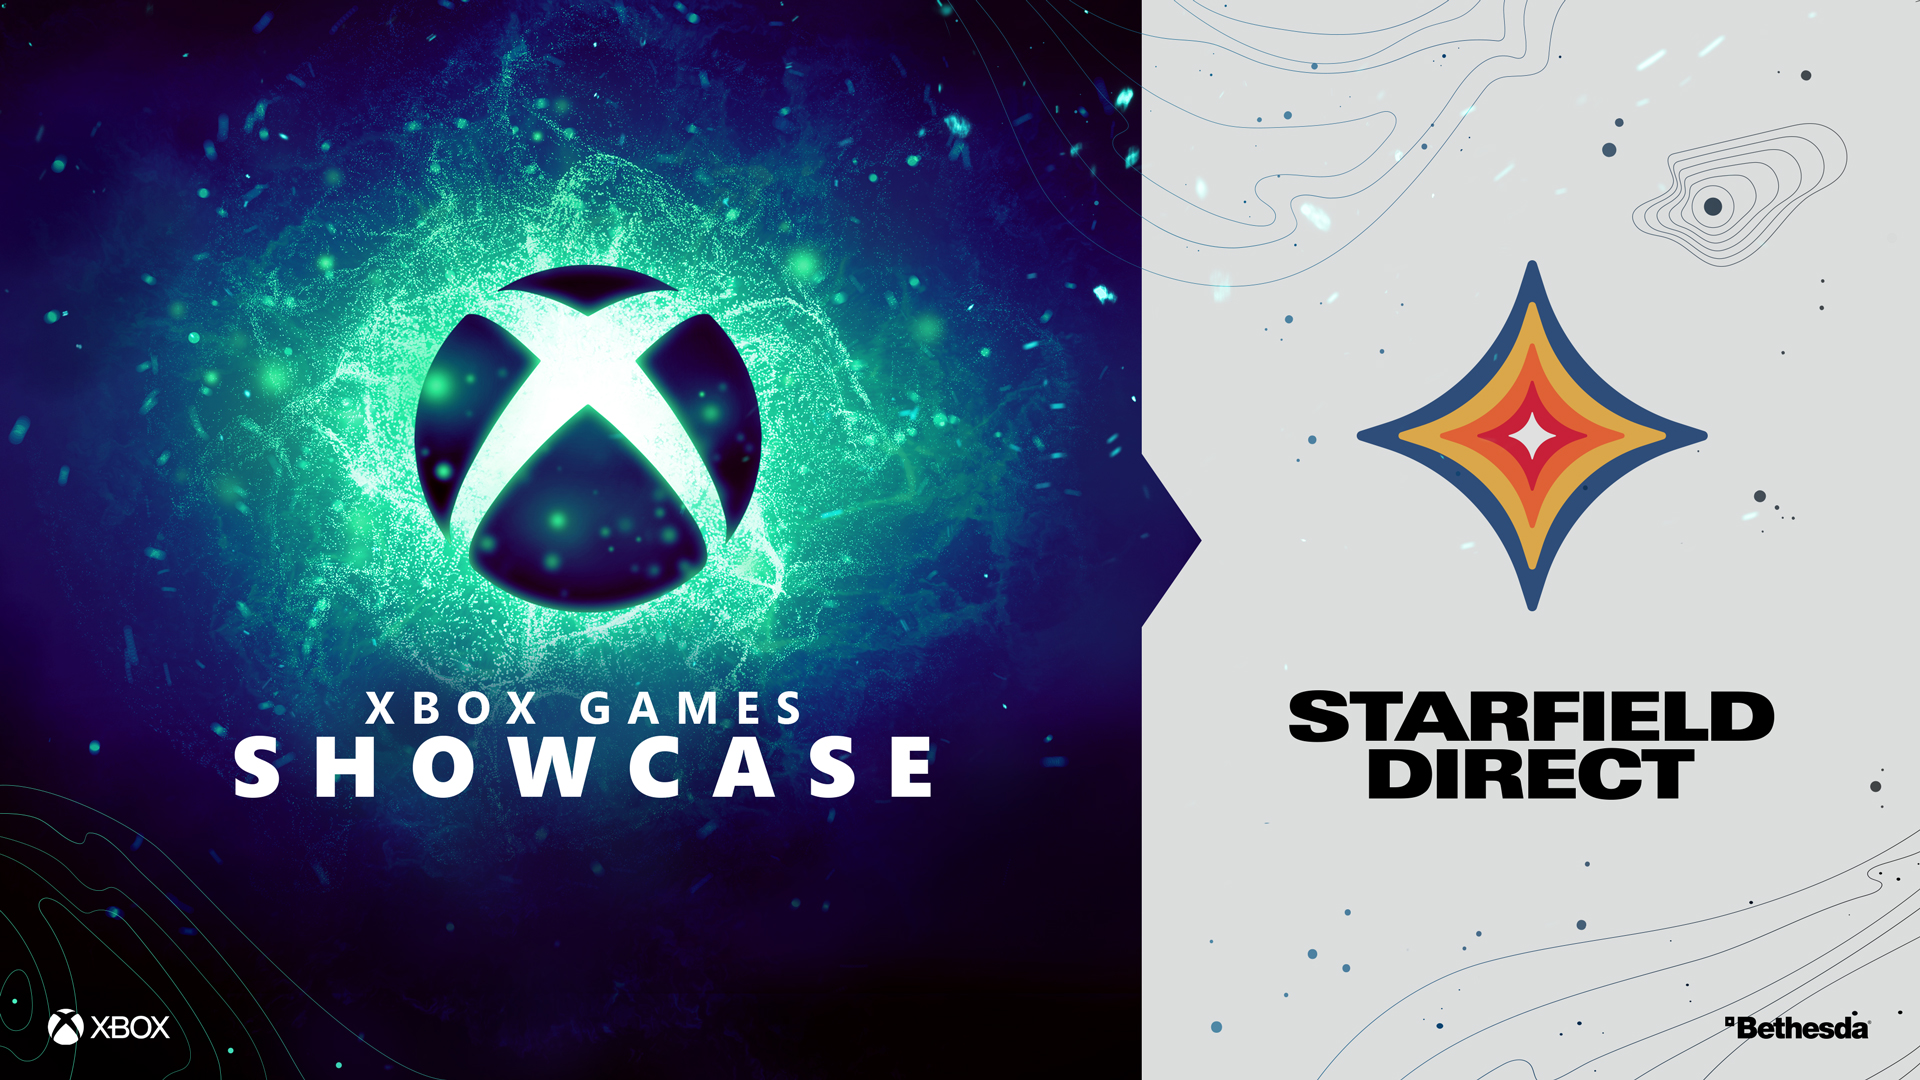 Image showing Xbox and Starfield logos